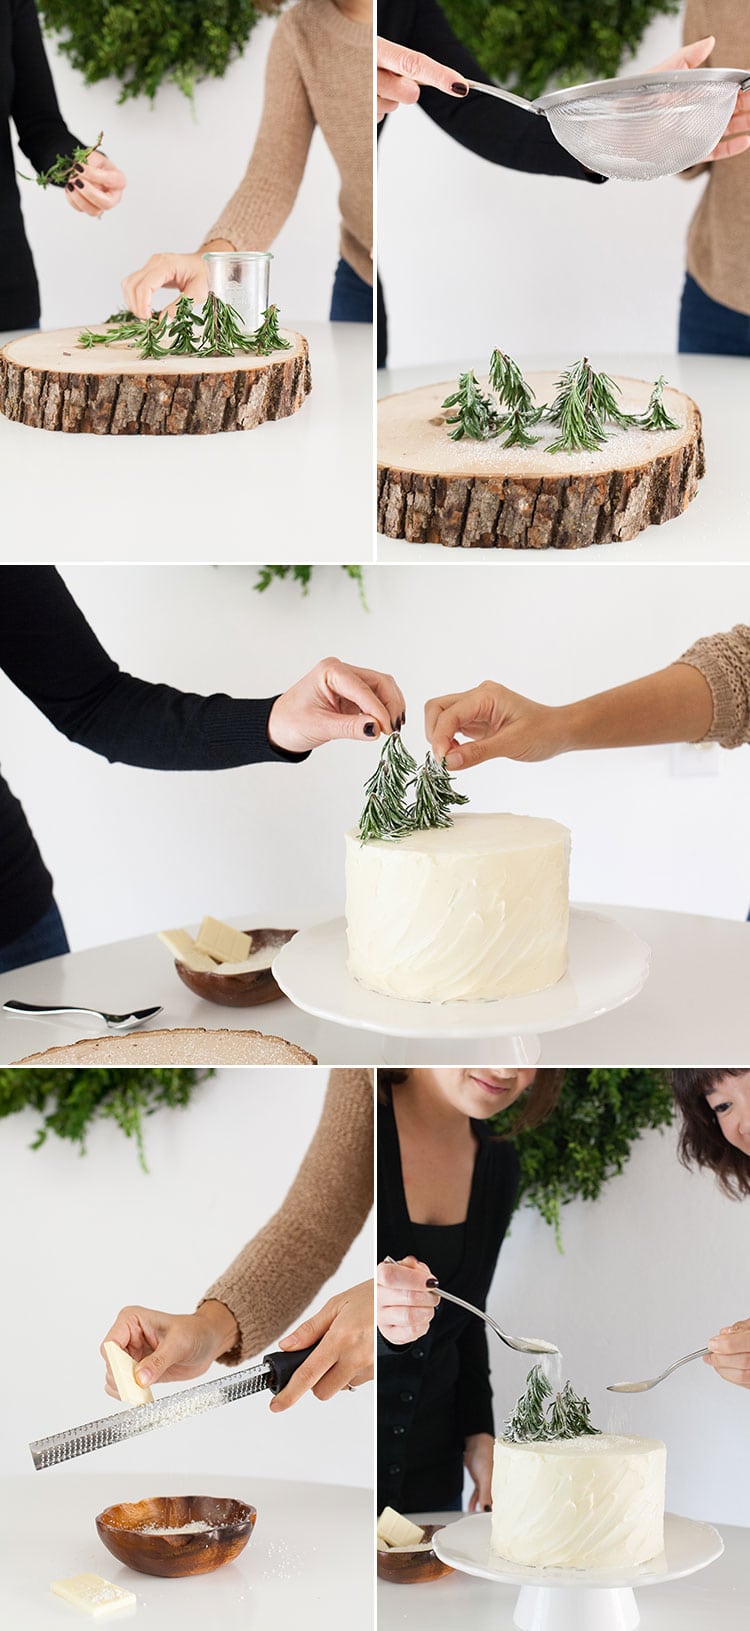 How To Decorate Cakes